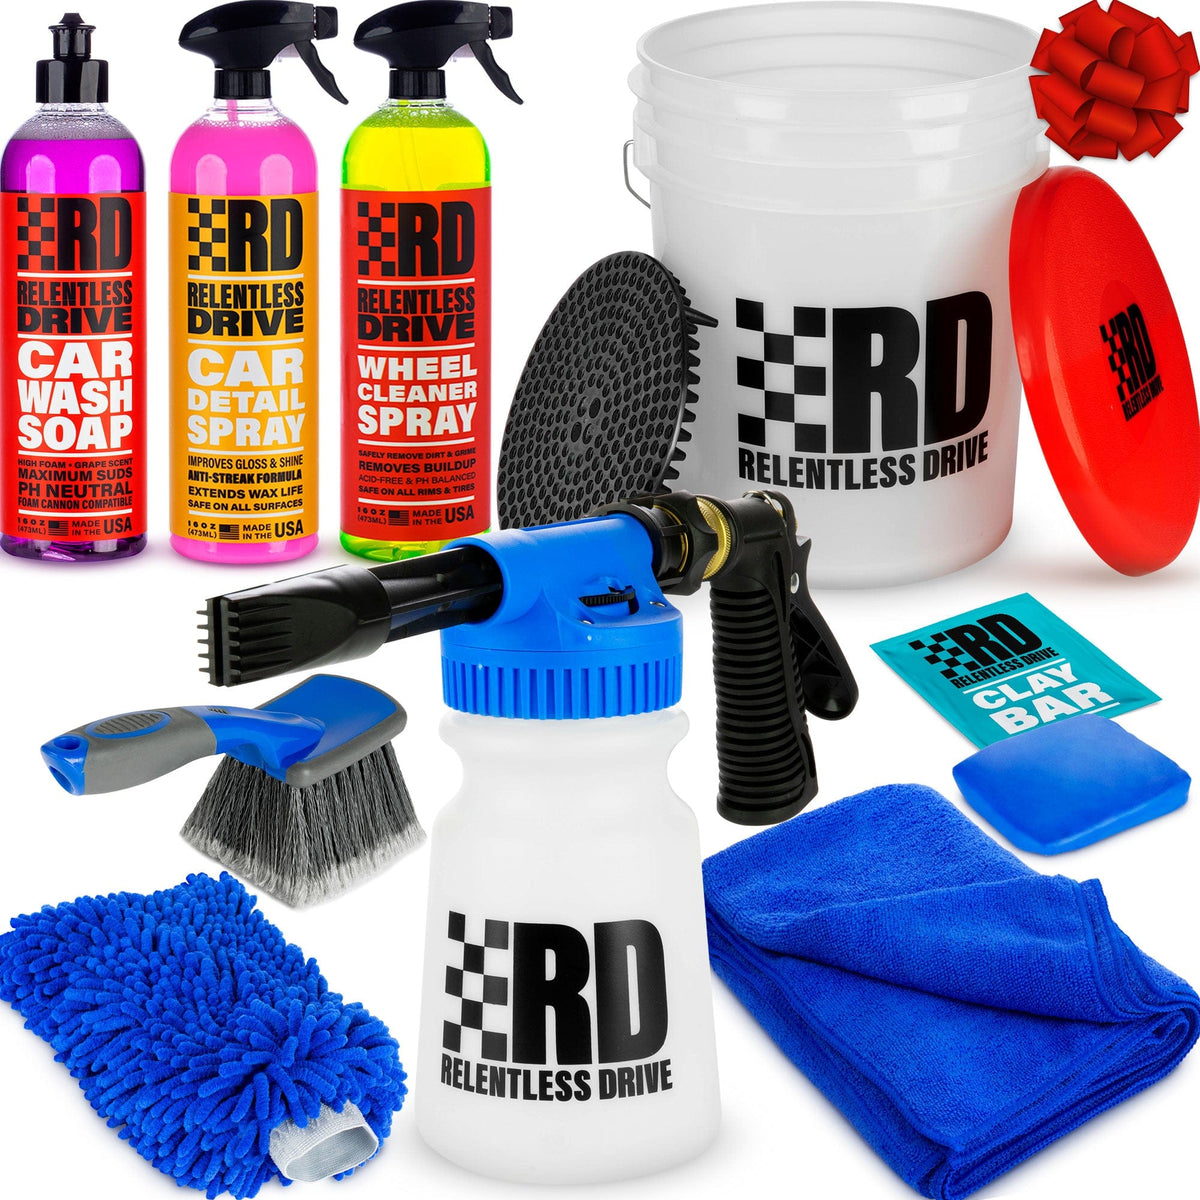 Relentless Drive Deluxe Car Wash Kit - Car Cleaning Kit with Car Wash Foam  Gun & 5 Gallon Car Wash Bucket - Complete Car Detailing Kit Comes for a  Showroom Shine!